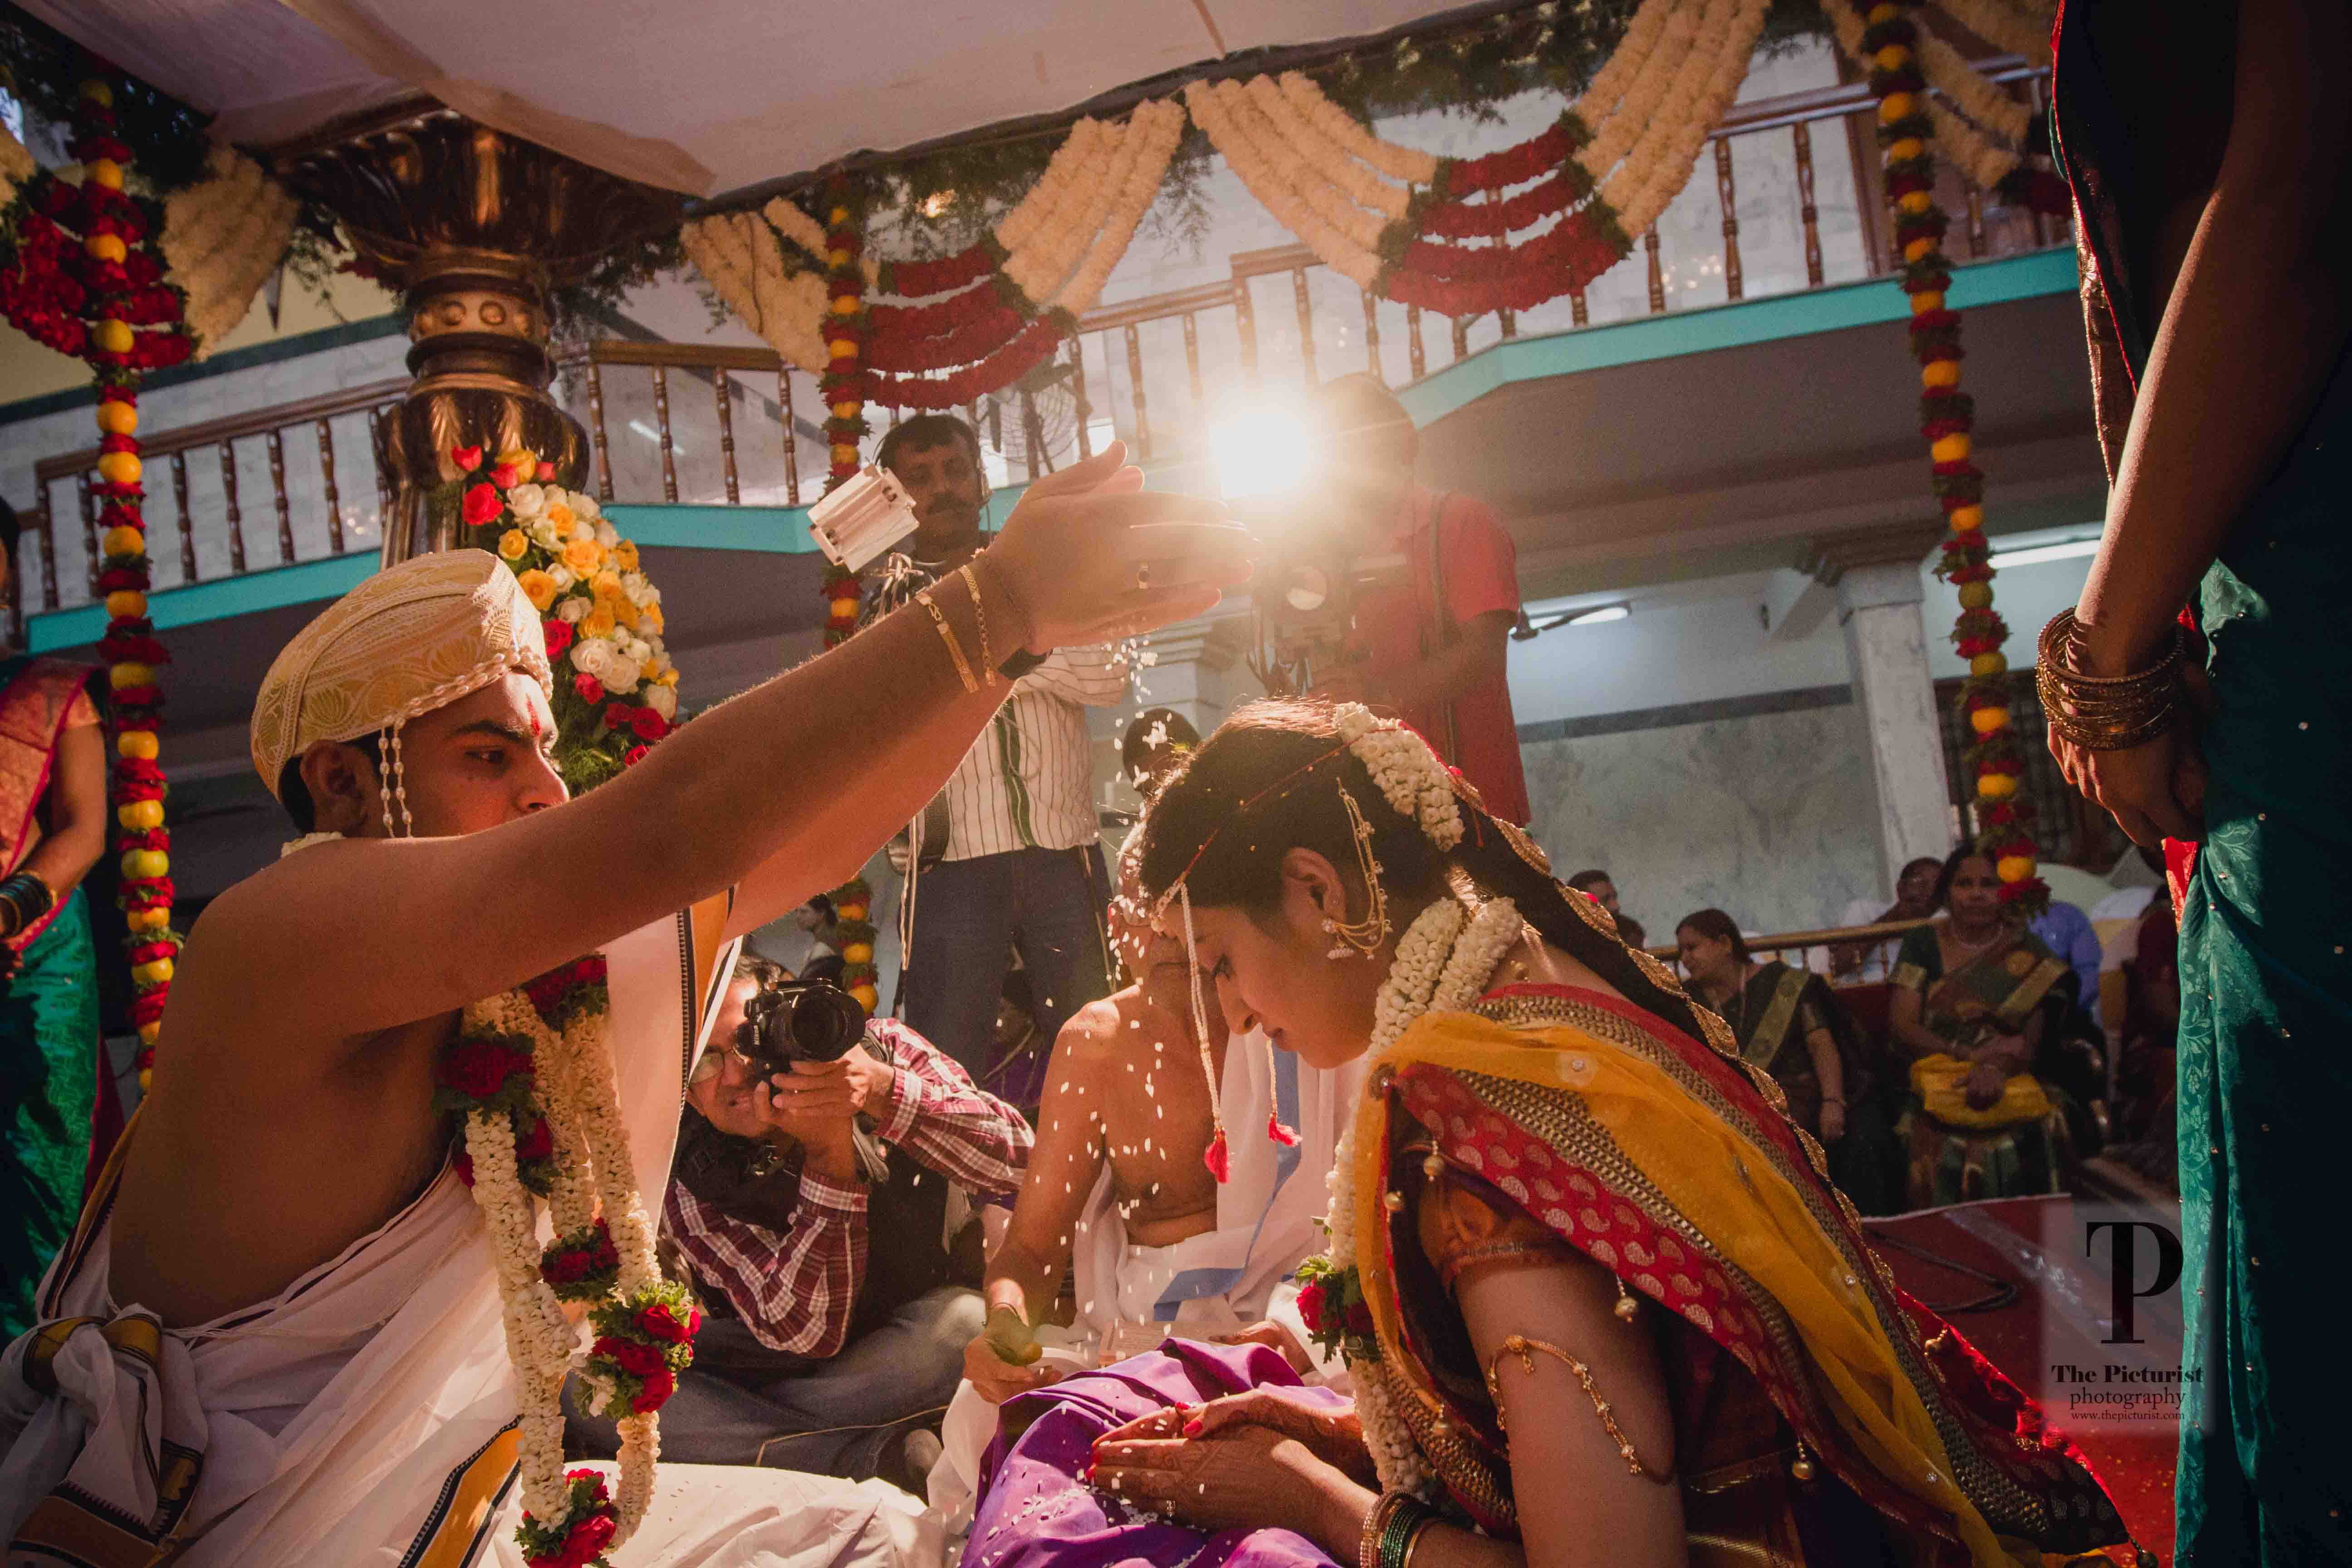 groom showers the bride with sacred rice during the wedding